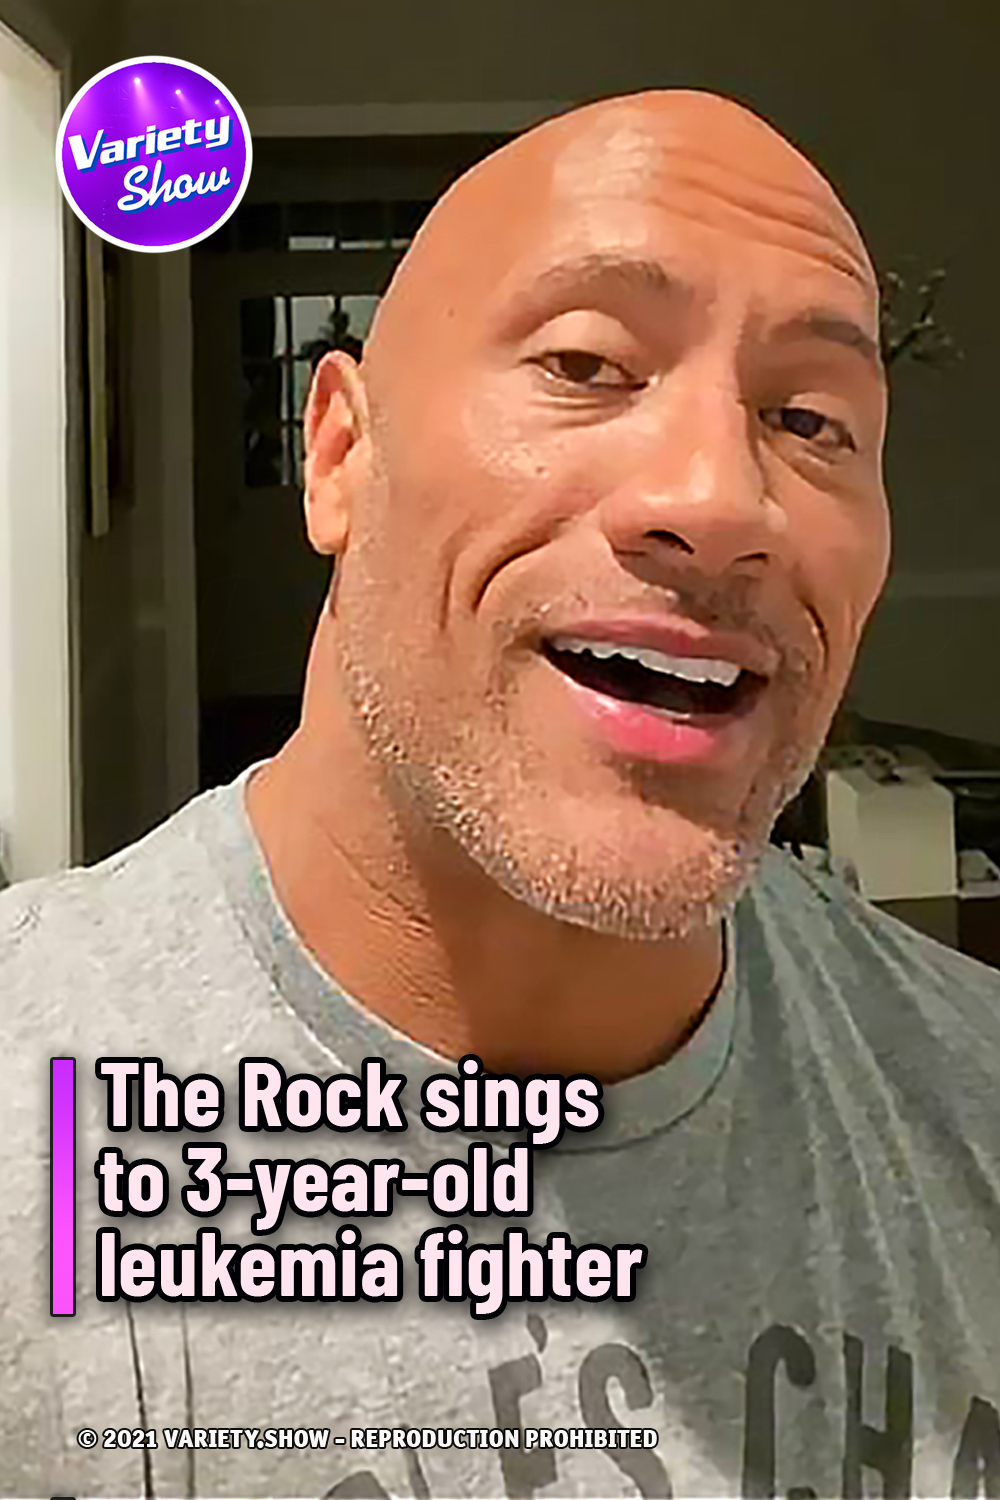 The Rock sings to 3-year-old leukemia fighter